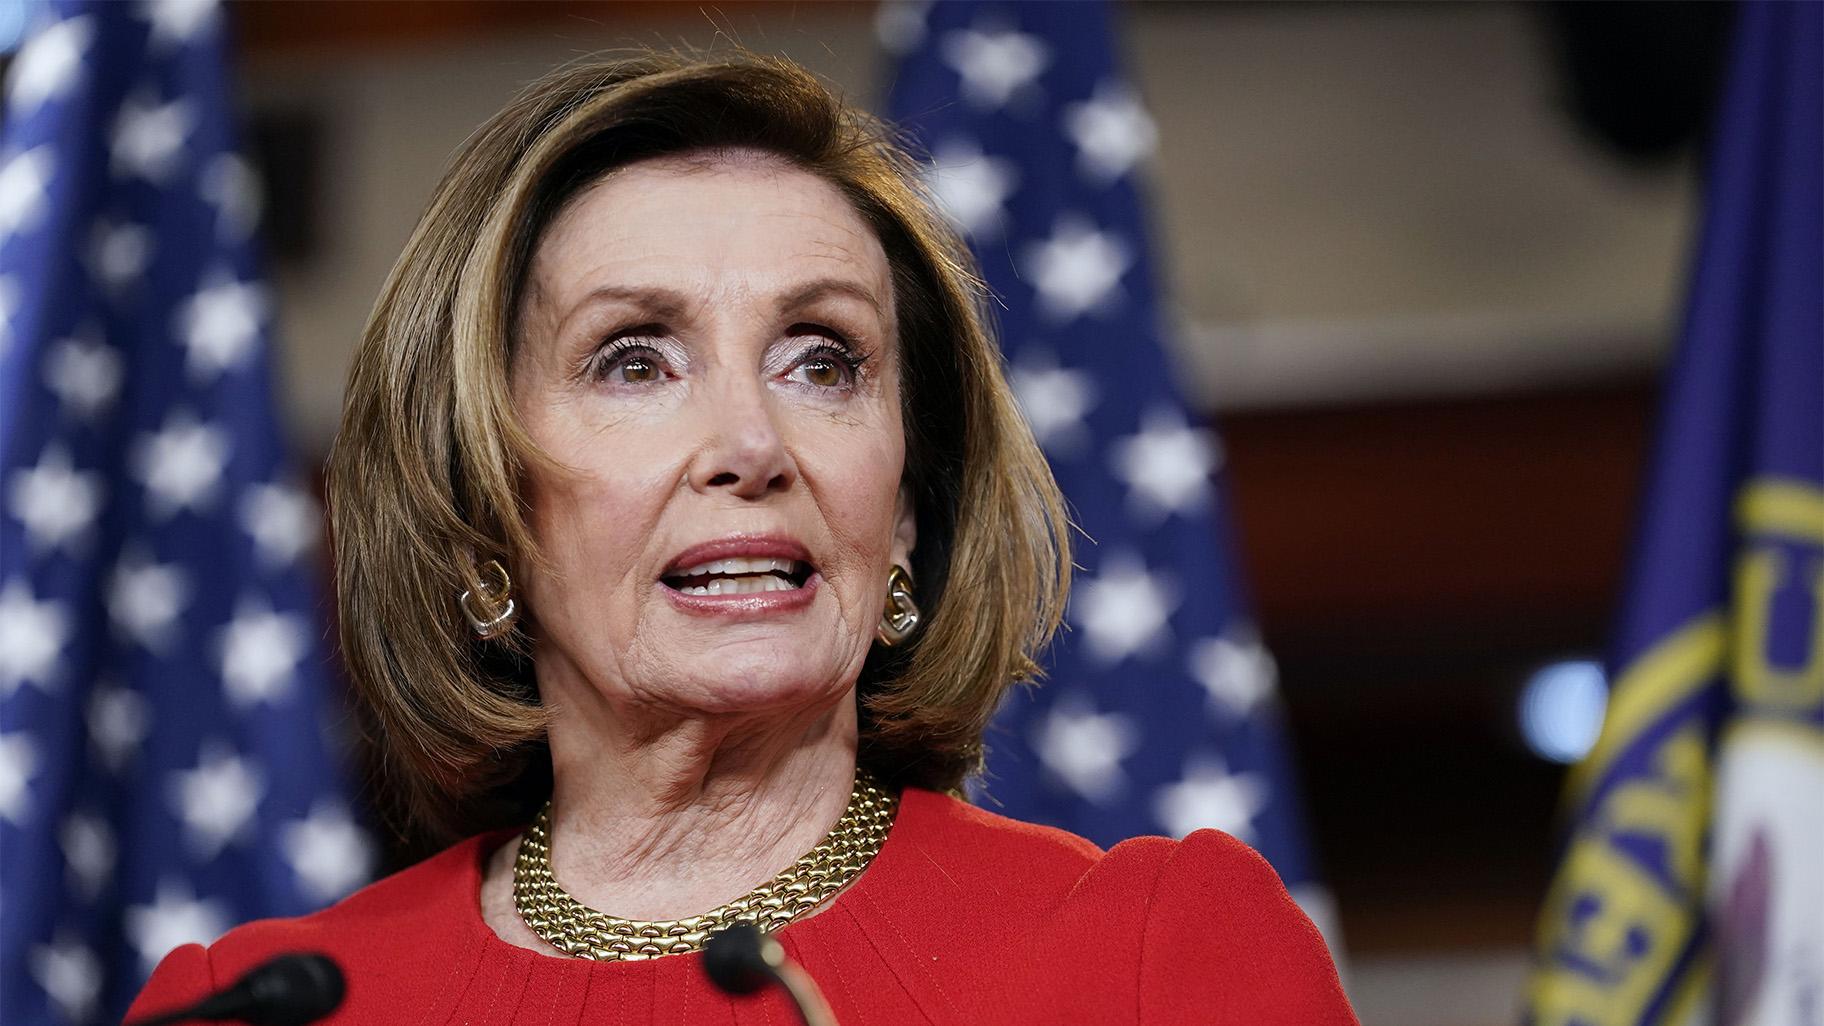 House Speaker Nancy Pelosi of Calif., speaks during a news conference on Capitol Hill in Washington, Thursday, May 13, 2021. (AP Photo / Susan Walsh)